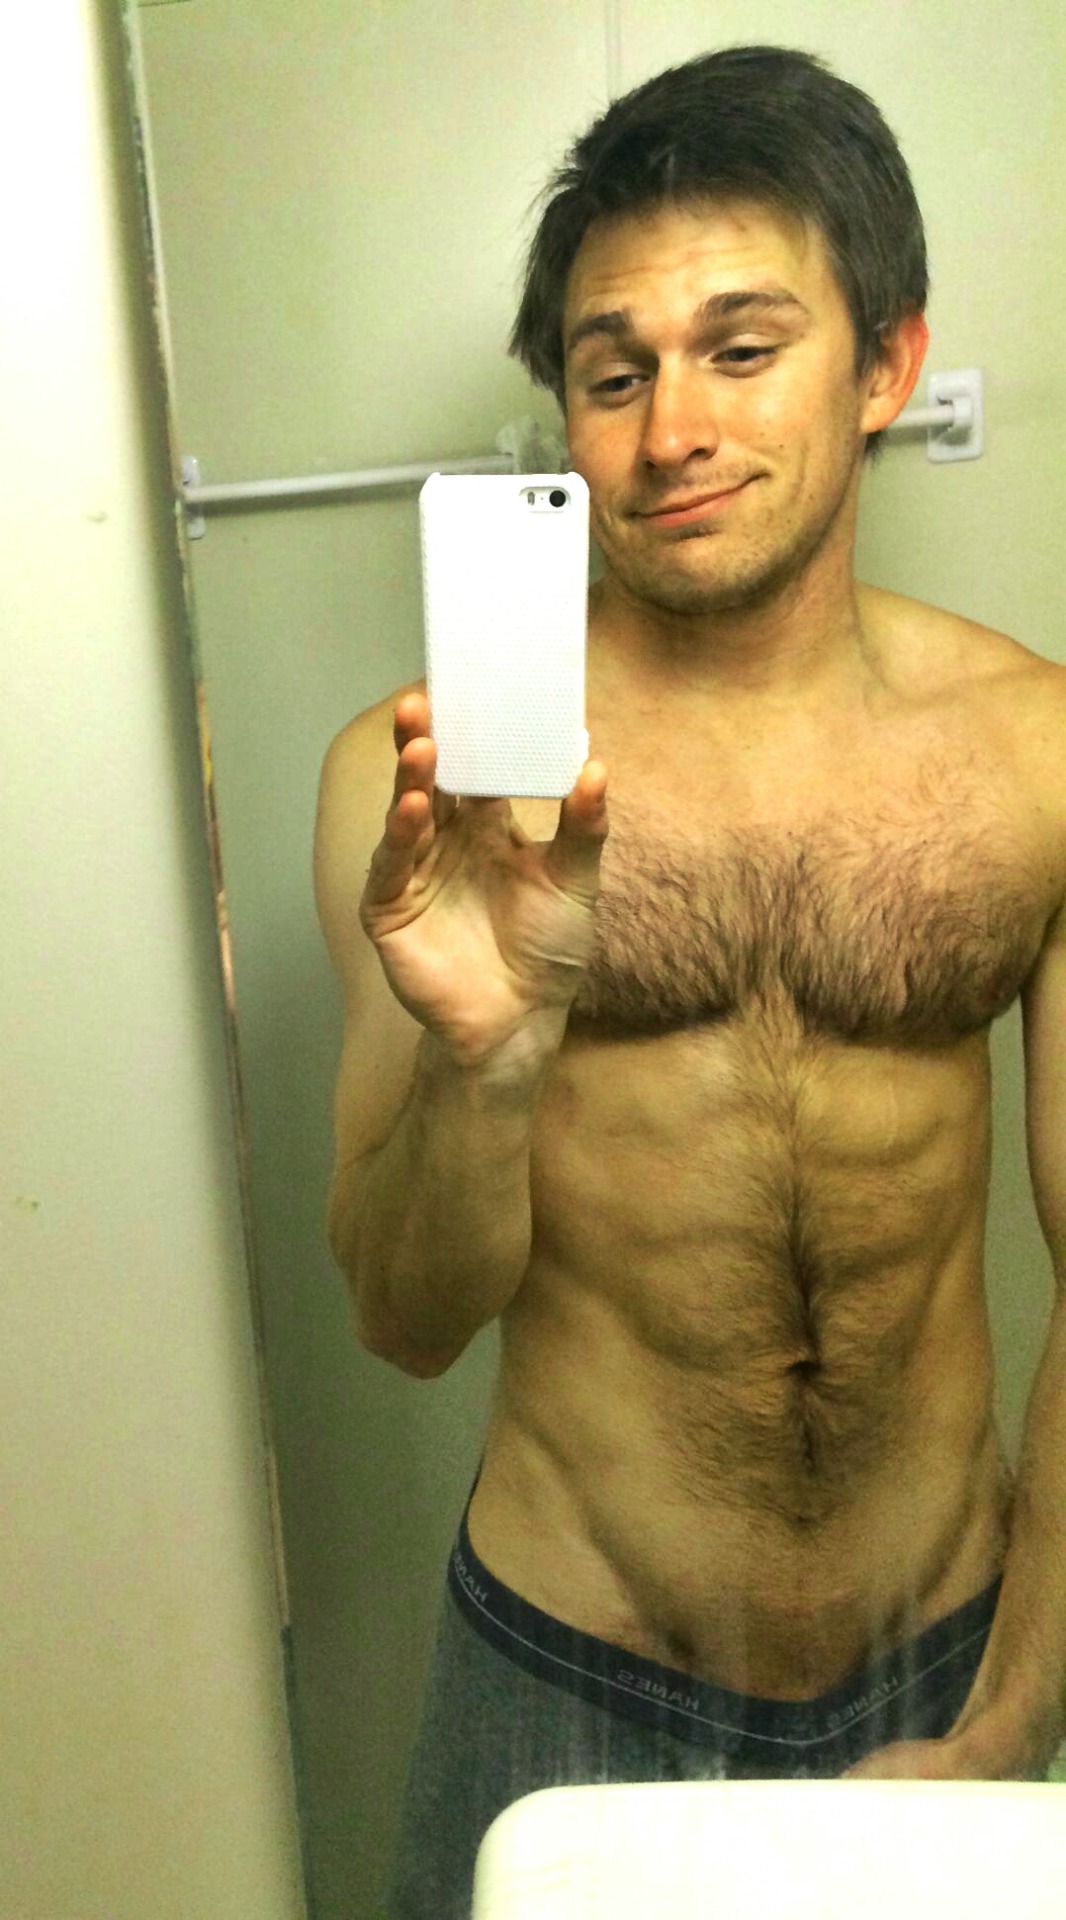 brainjock:  Nerdy Exchange Bro!  When did all the geeks start getting fit as fuck???